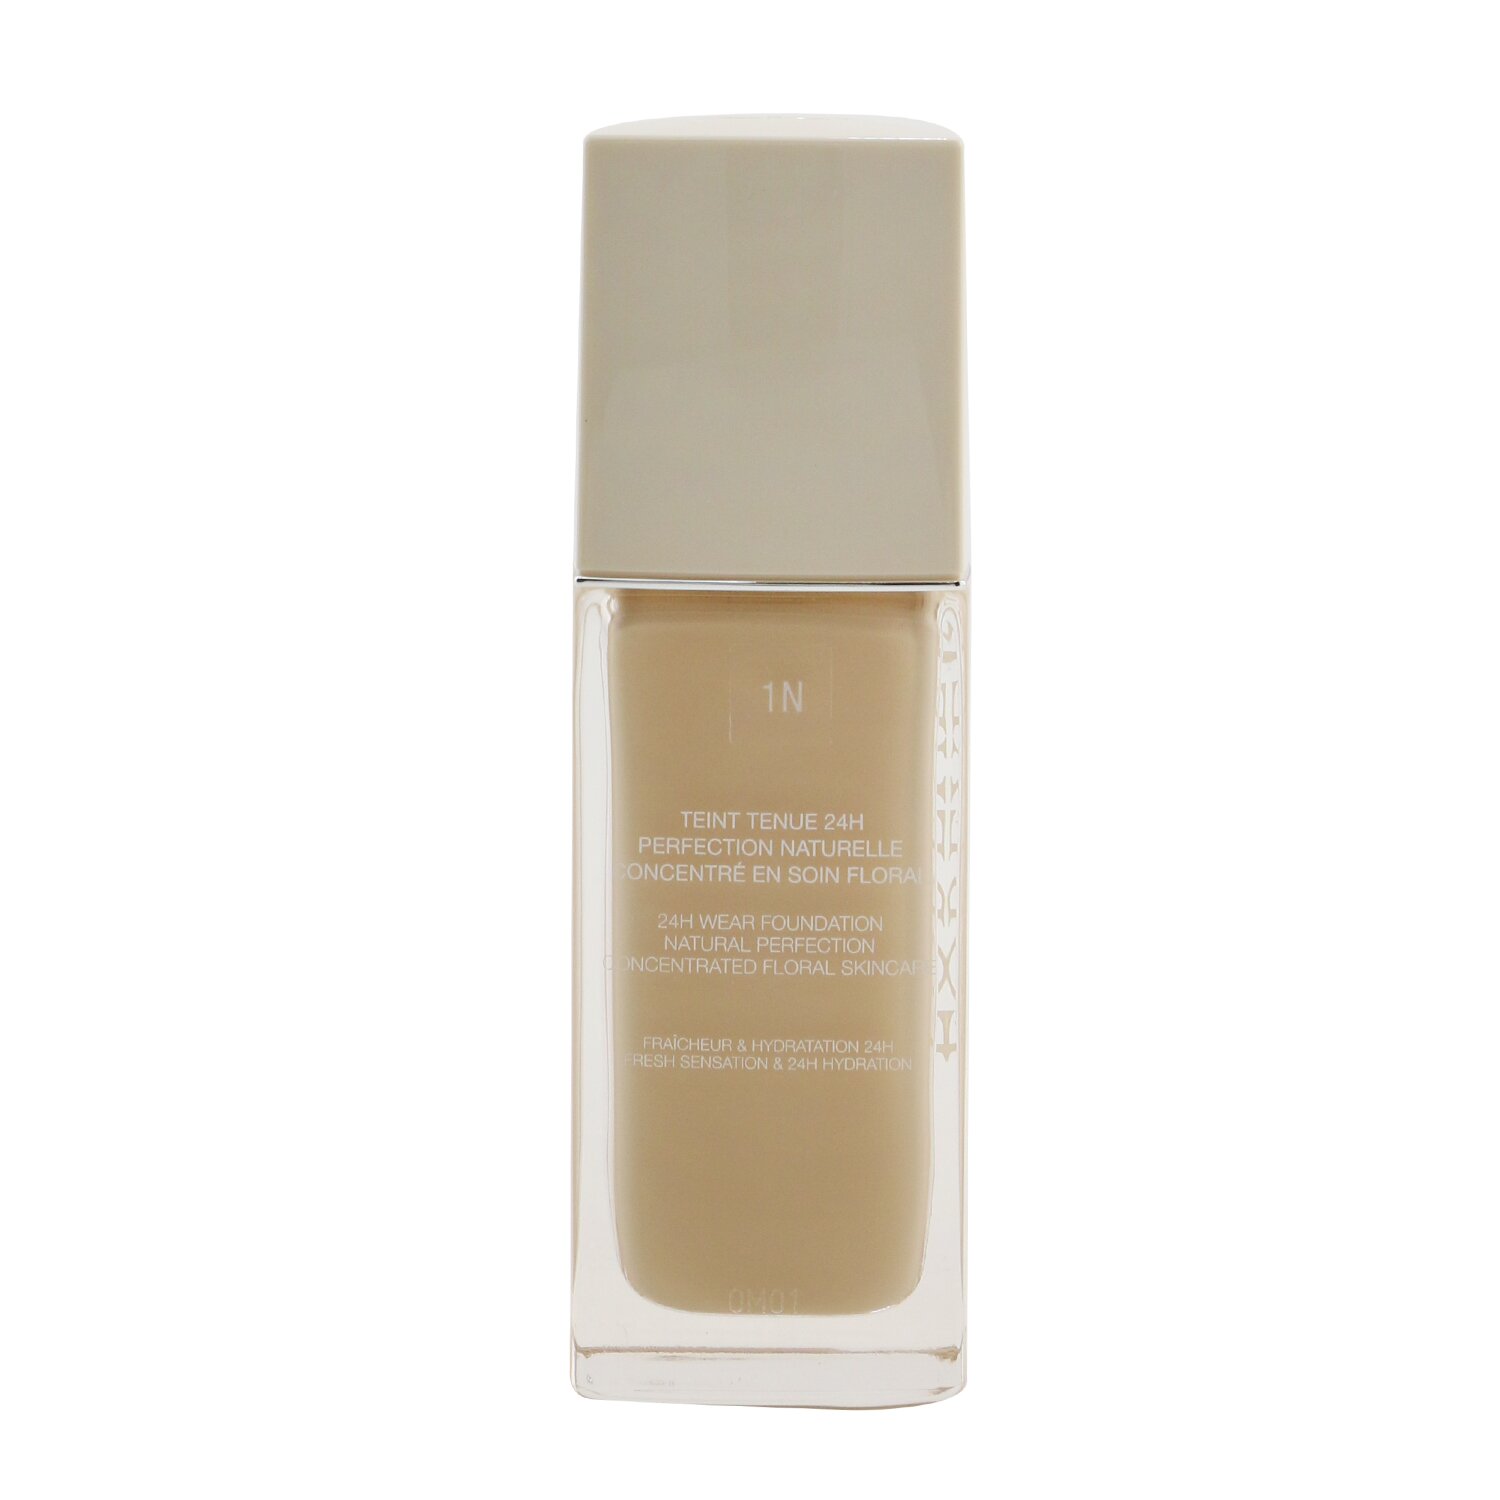 Christian Dior Dior Forever Natural Nude 24H Wear Foundation - # 1N Neutral  30ml1oz | KOODING